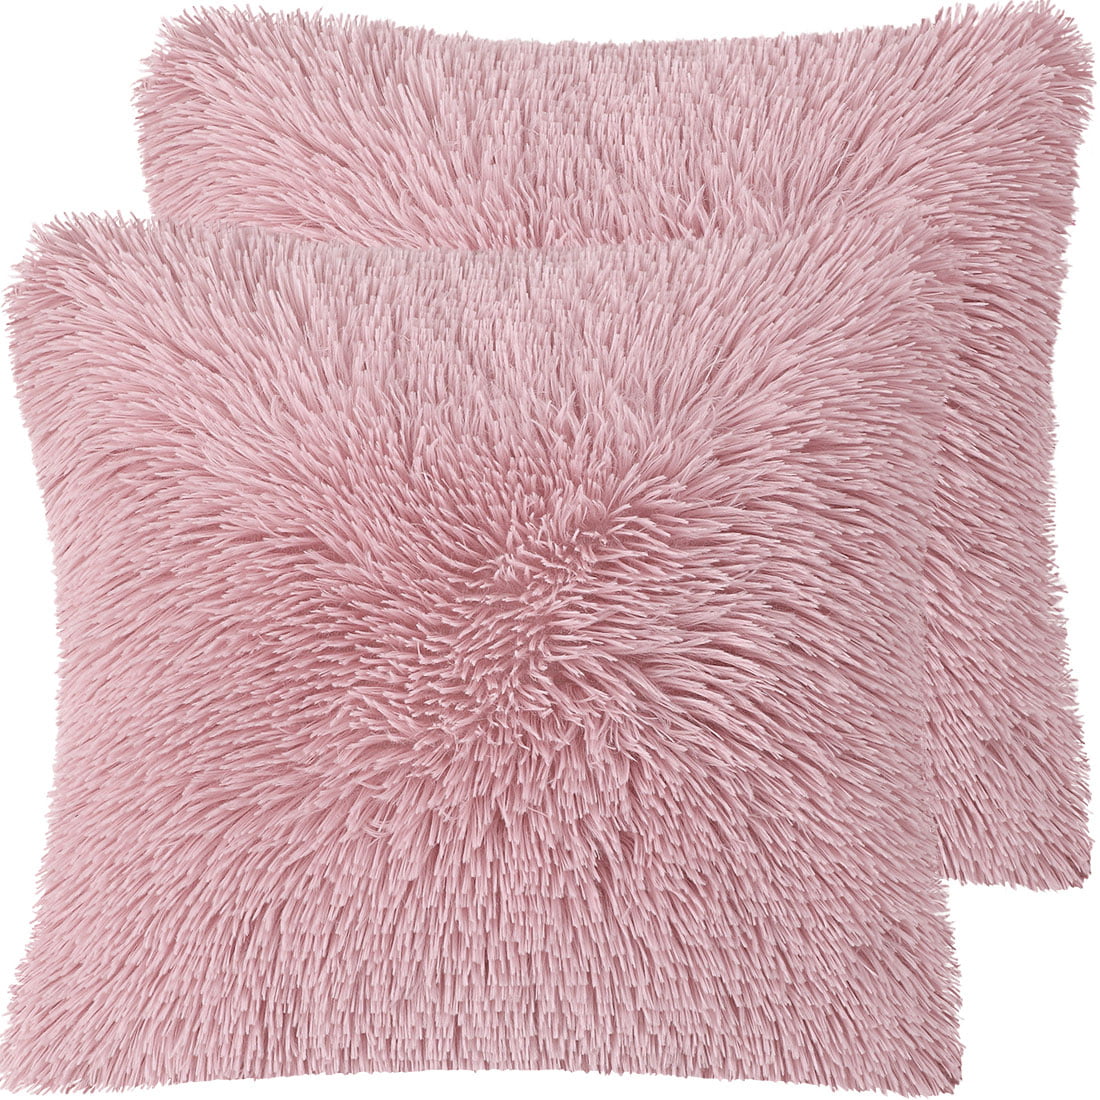 Trinity 2 Pieces Shaggy Fluffy Faux Fur Decorative Throw Pillow Cover, Taupe, 18 x 18 Inches